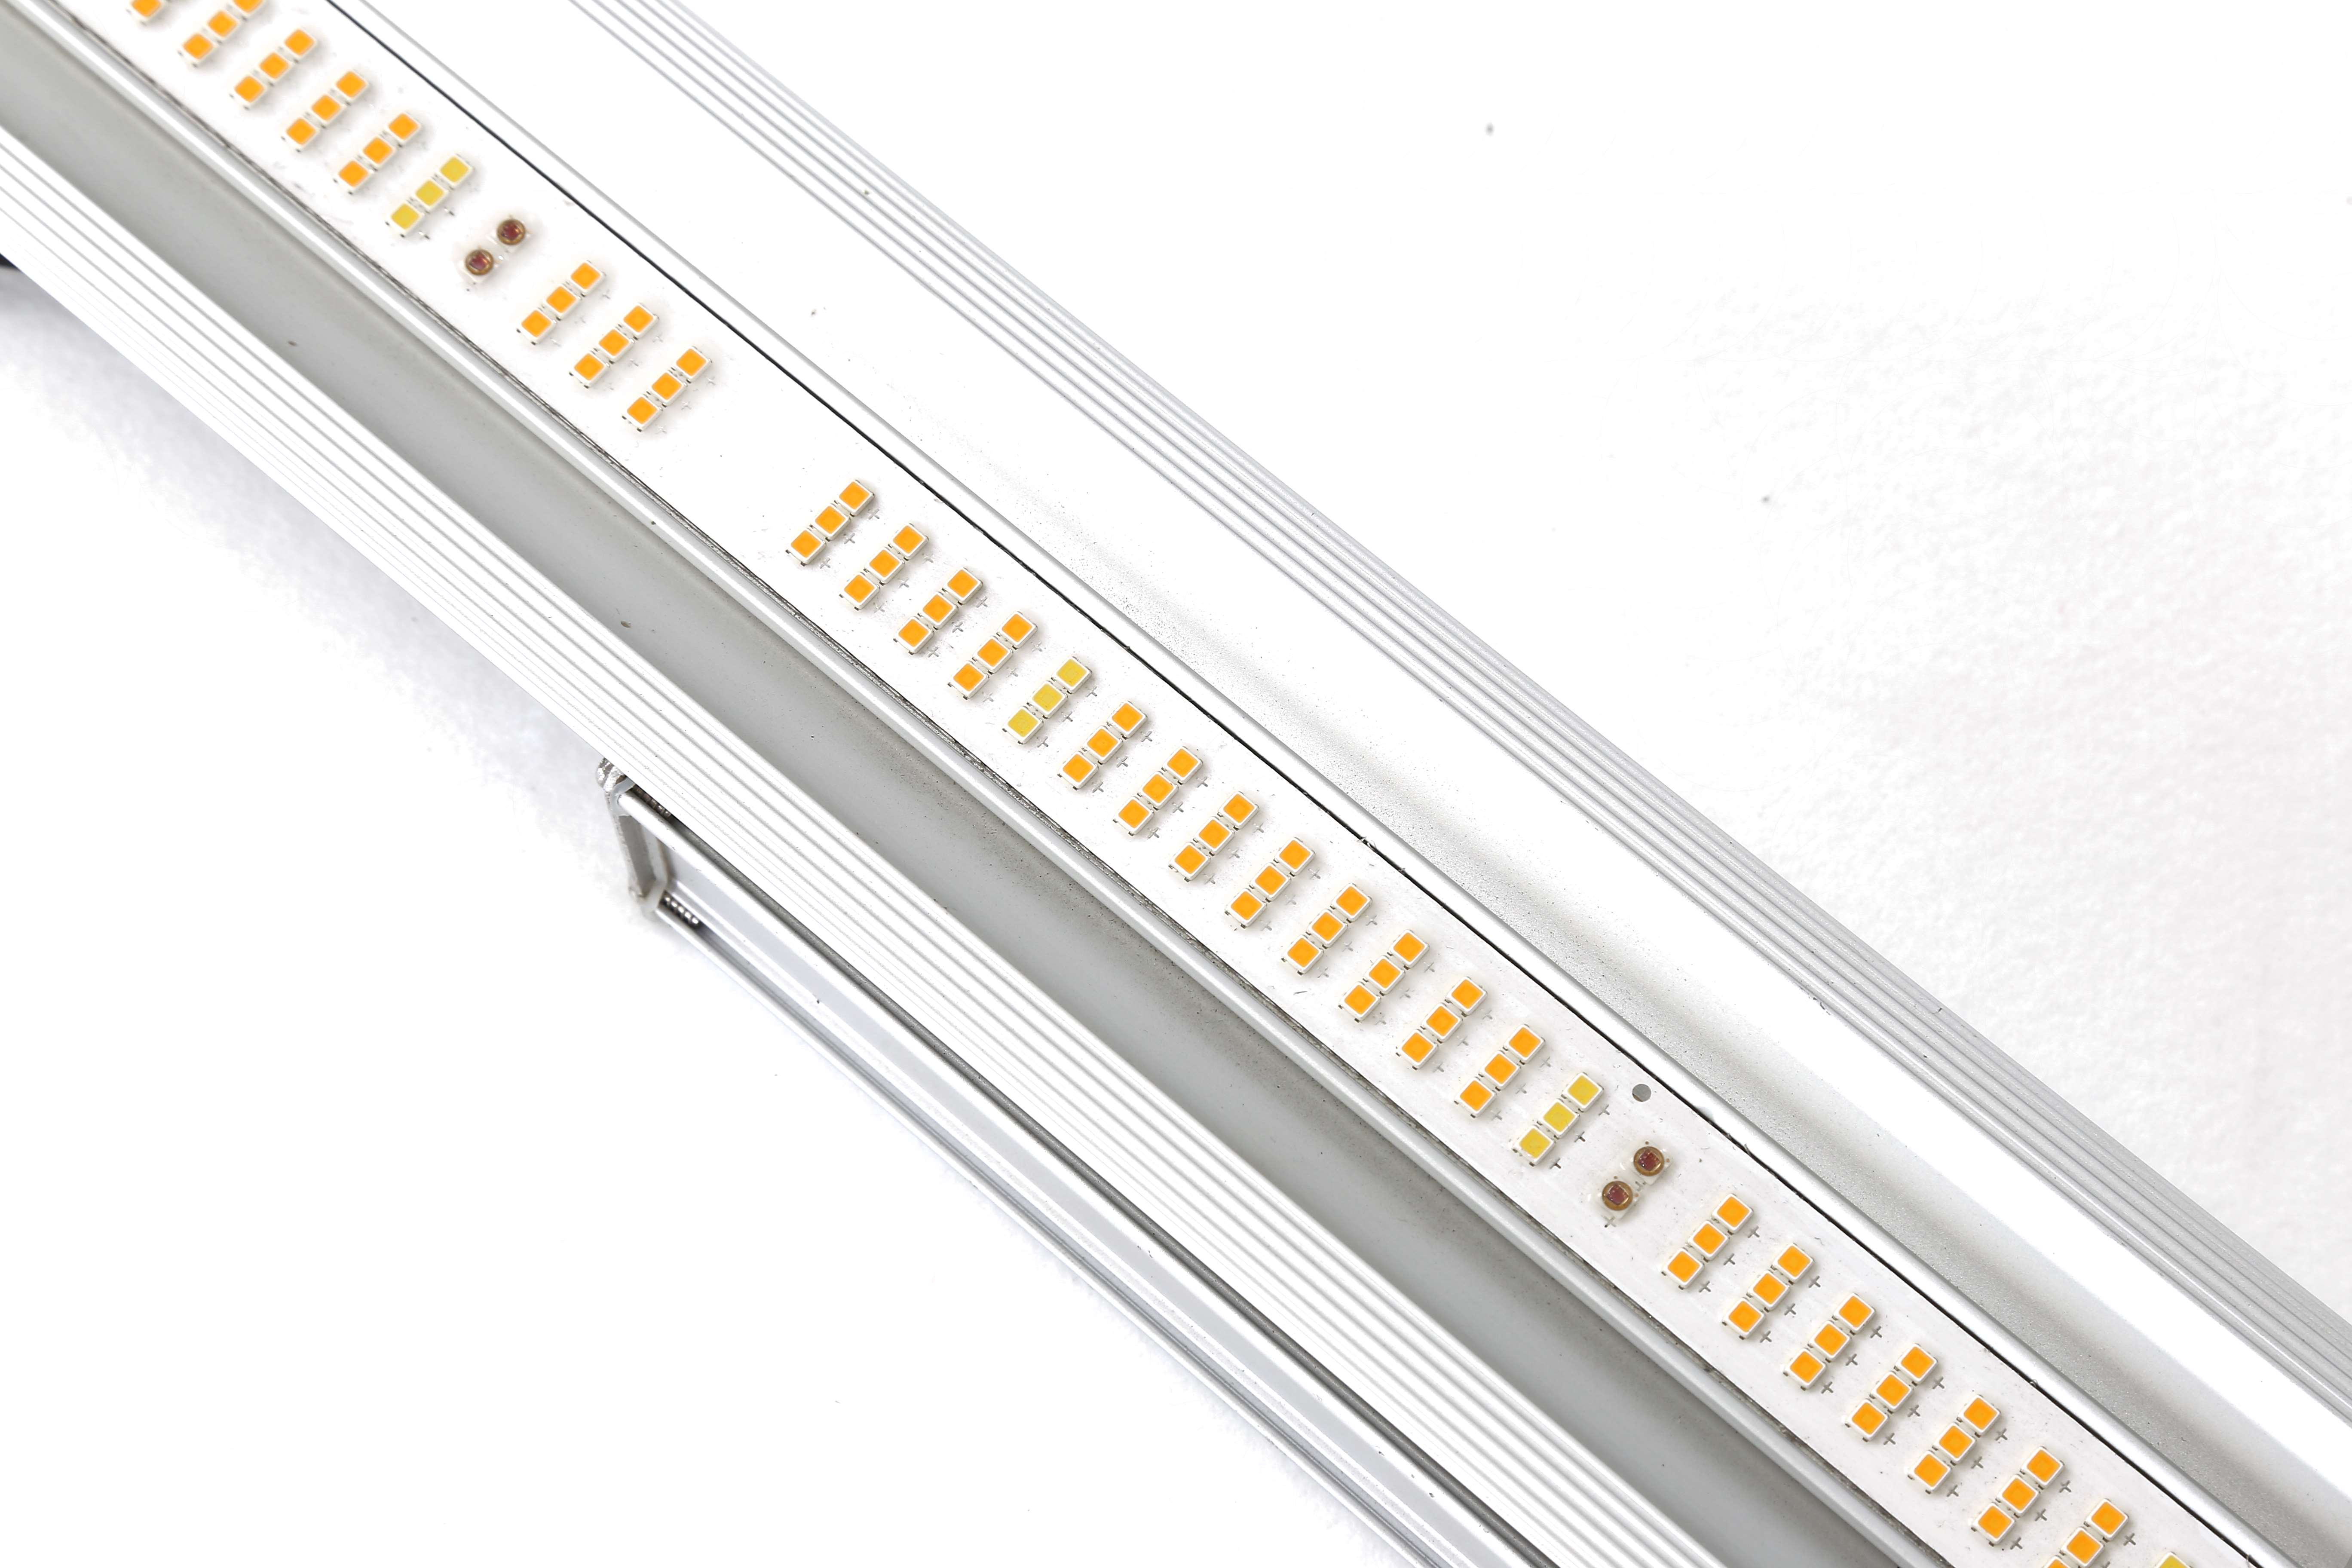 A1-02660 Led plant grow light 660W with New Diodes & IR Lights Full Spectrum Veg Bloom Growing Lamps for Indoor Plants Seeding Flower Led Plant Light